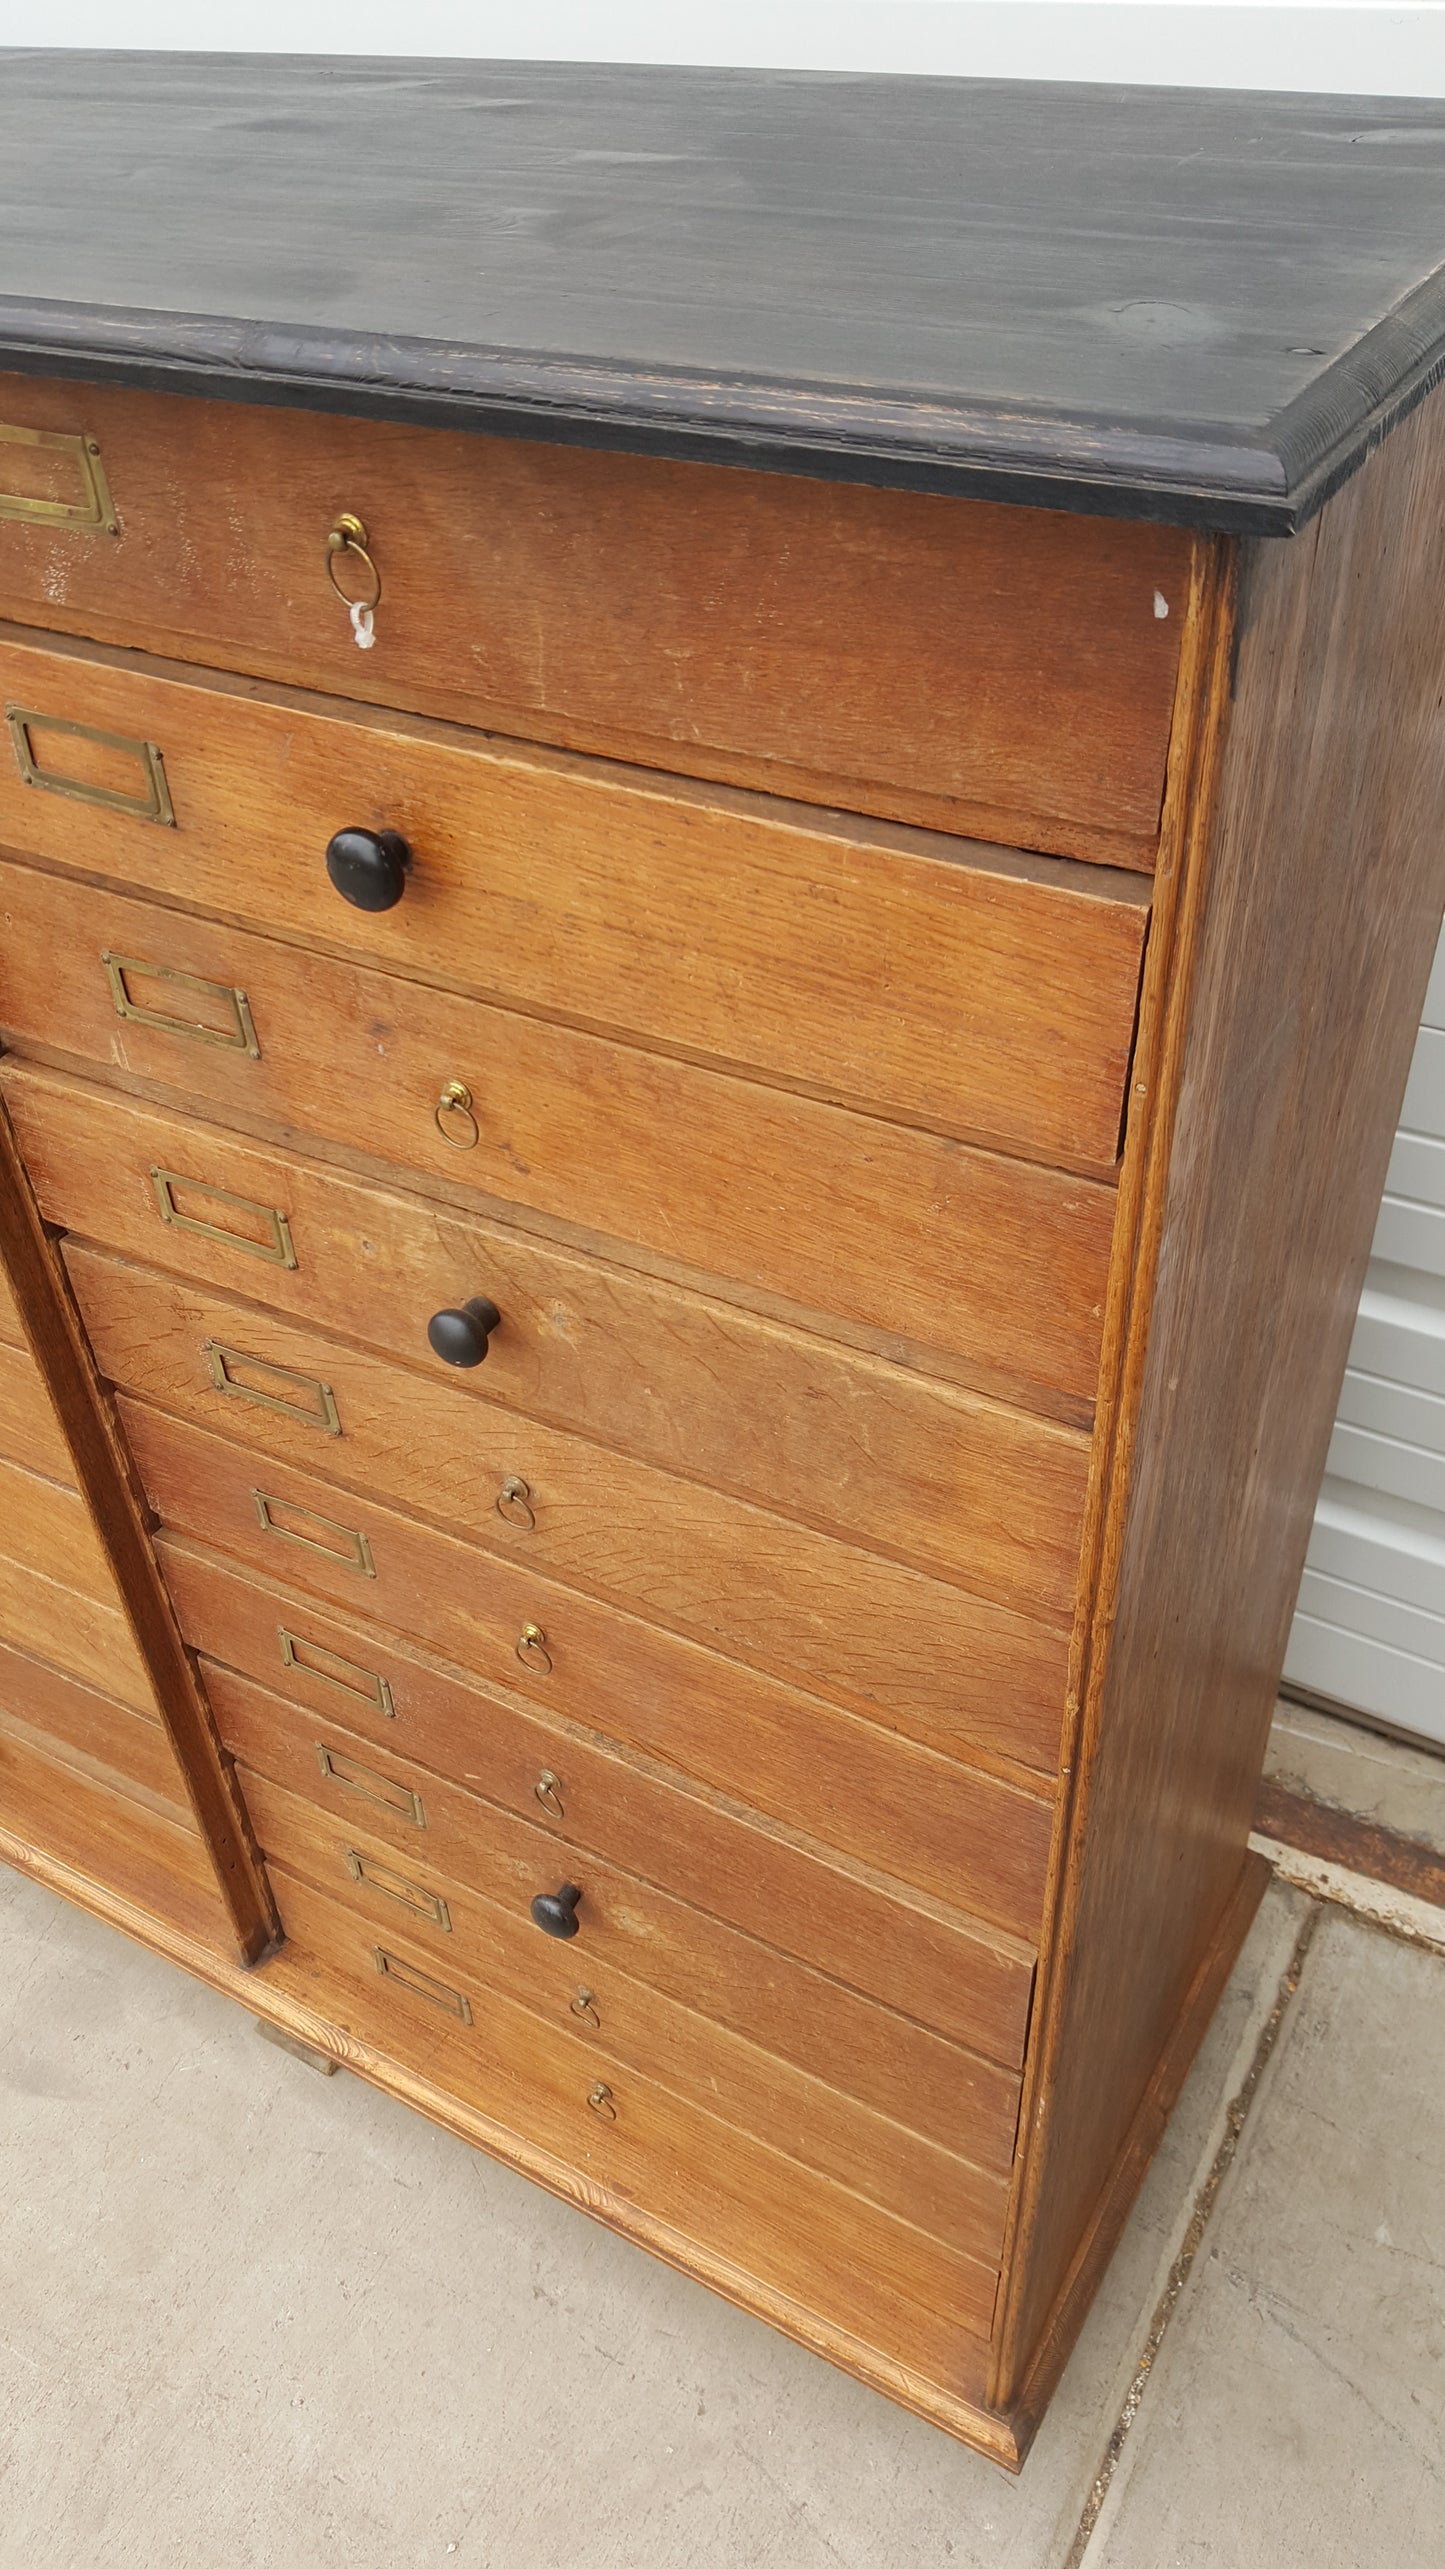 Antique Wood Cabinet with 40 Drawers